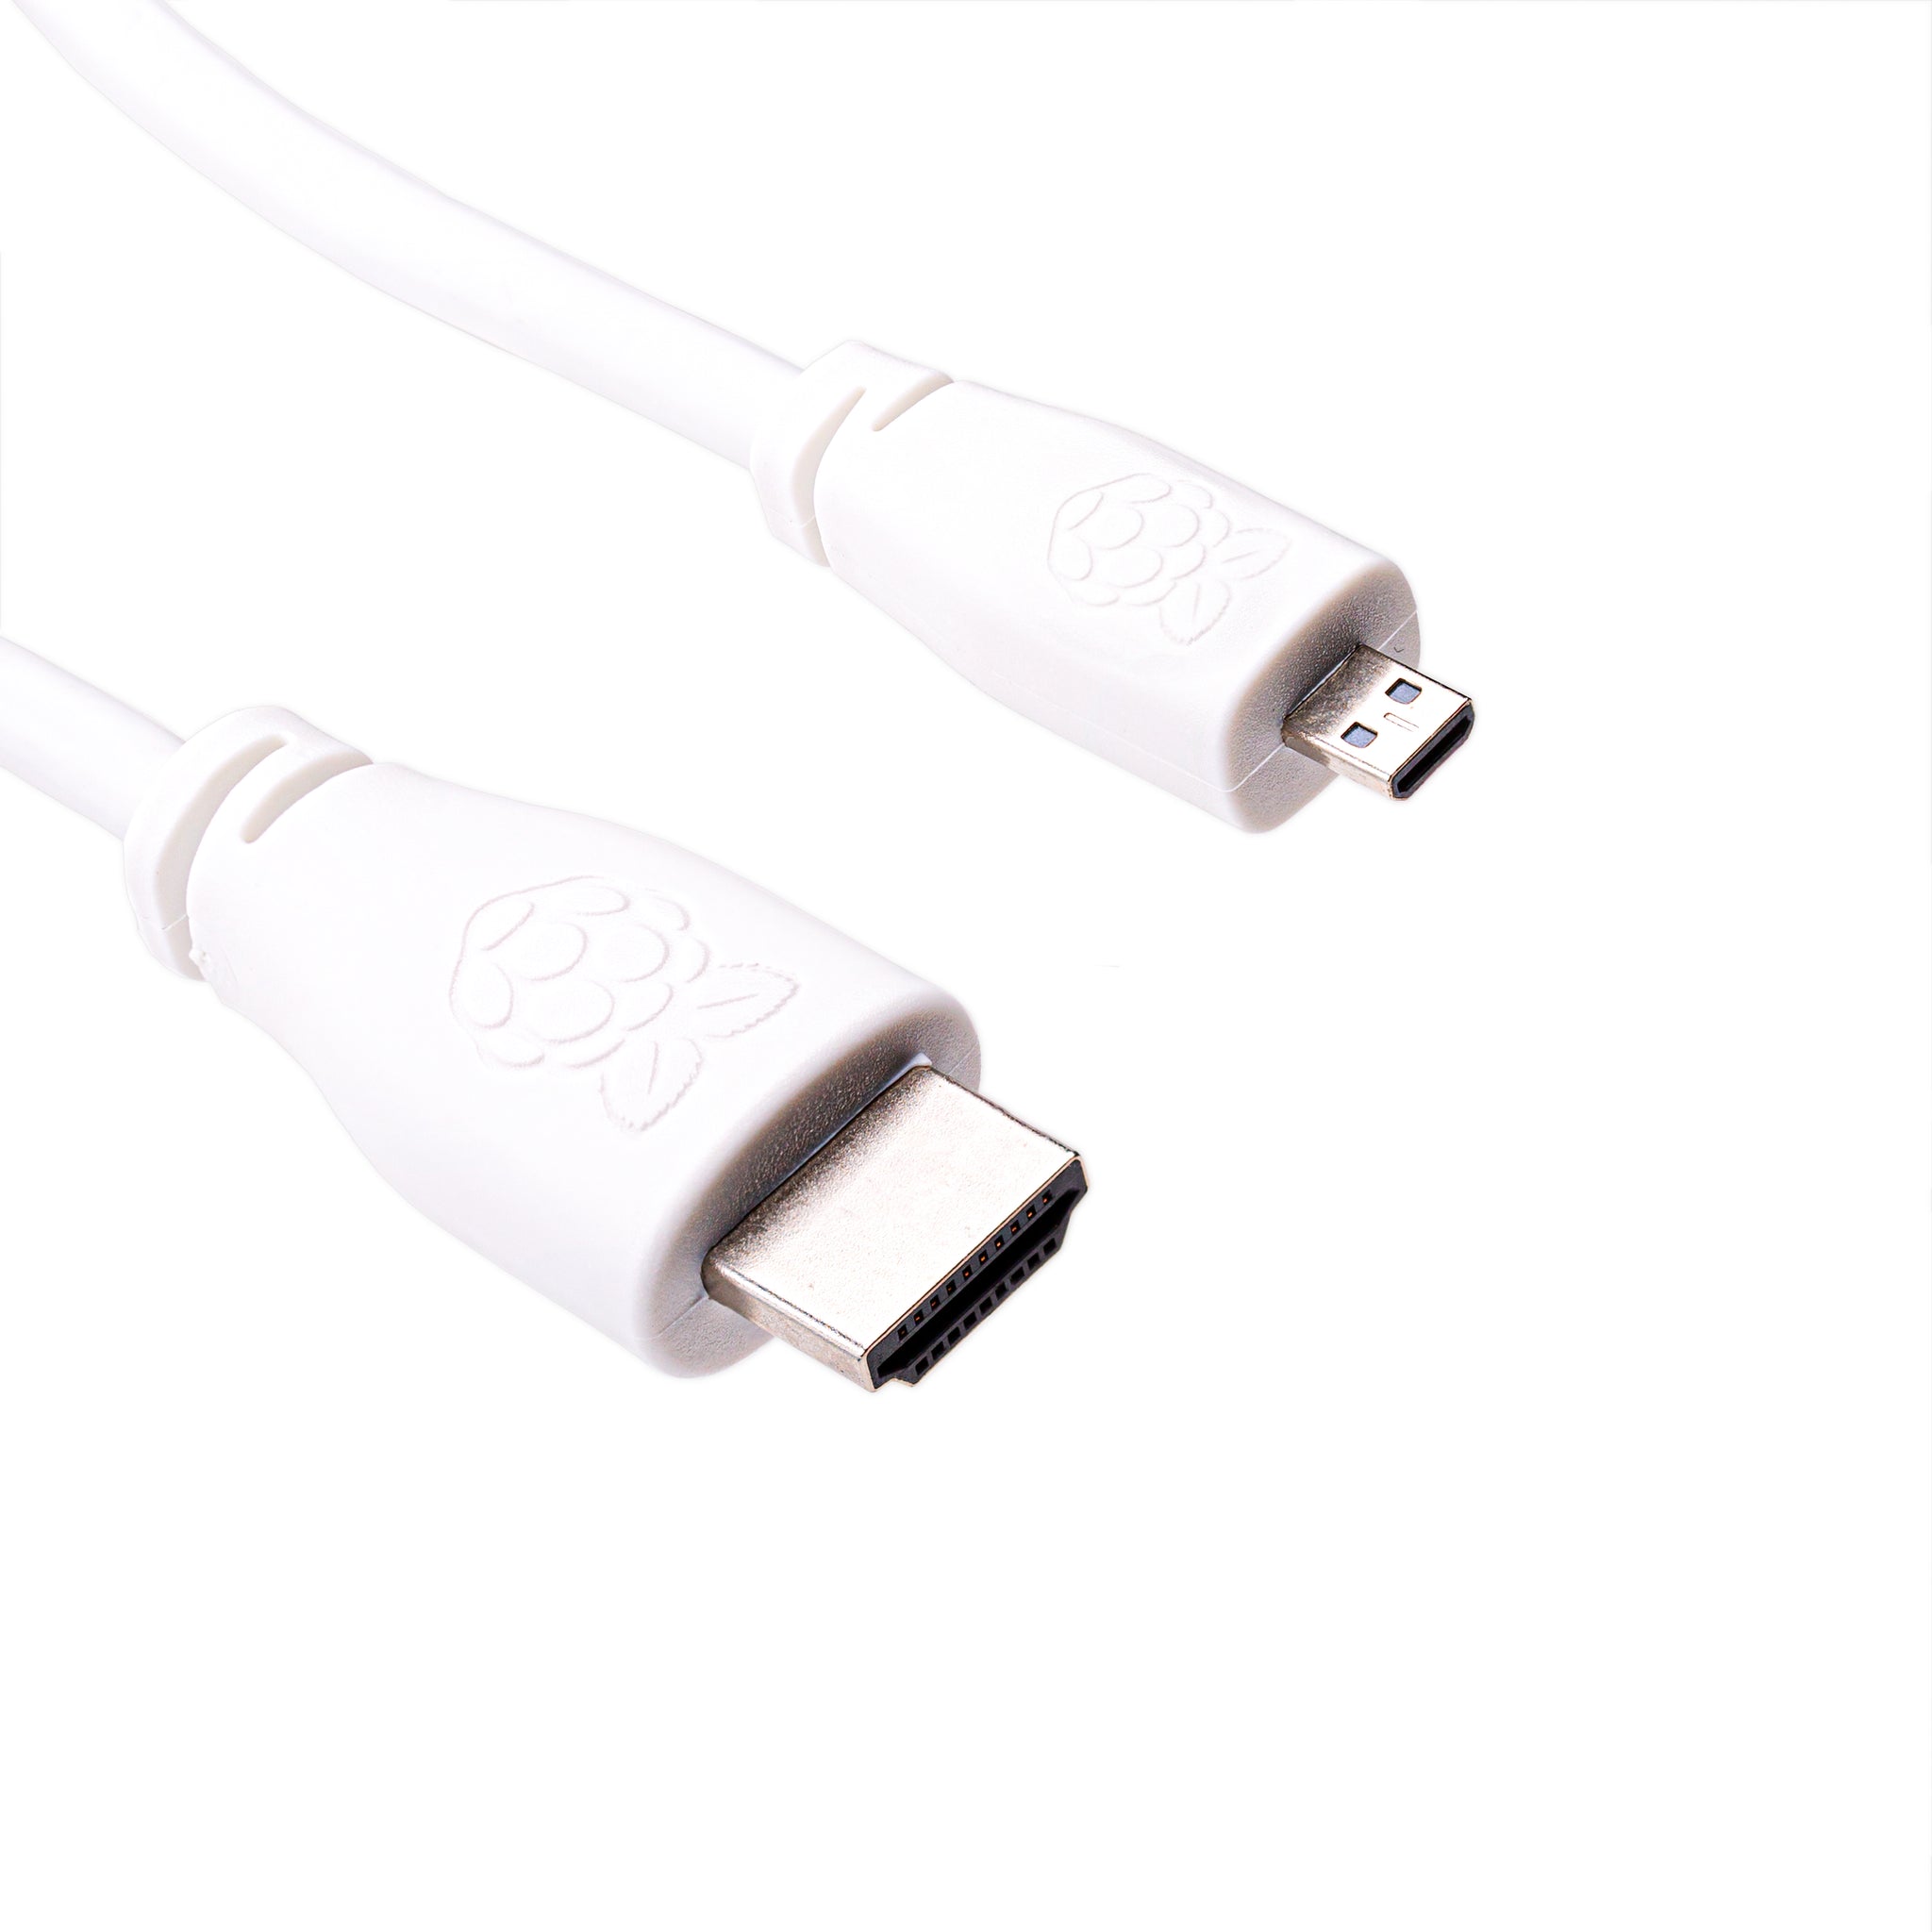 Pi to standard Cable, to 2 meter, White or